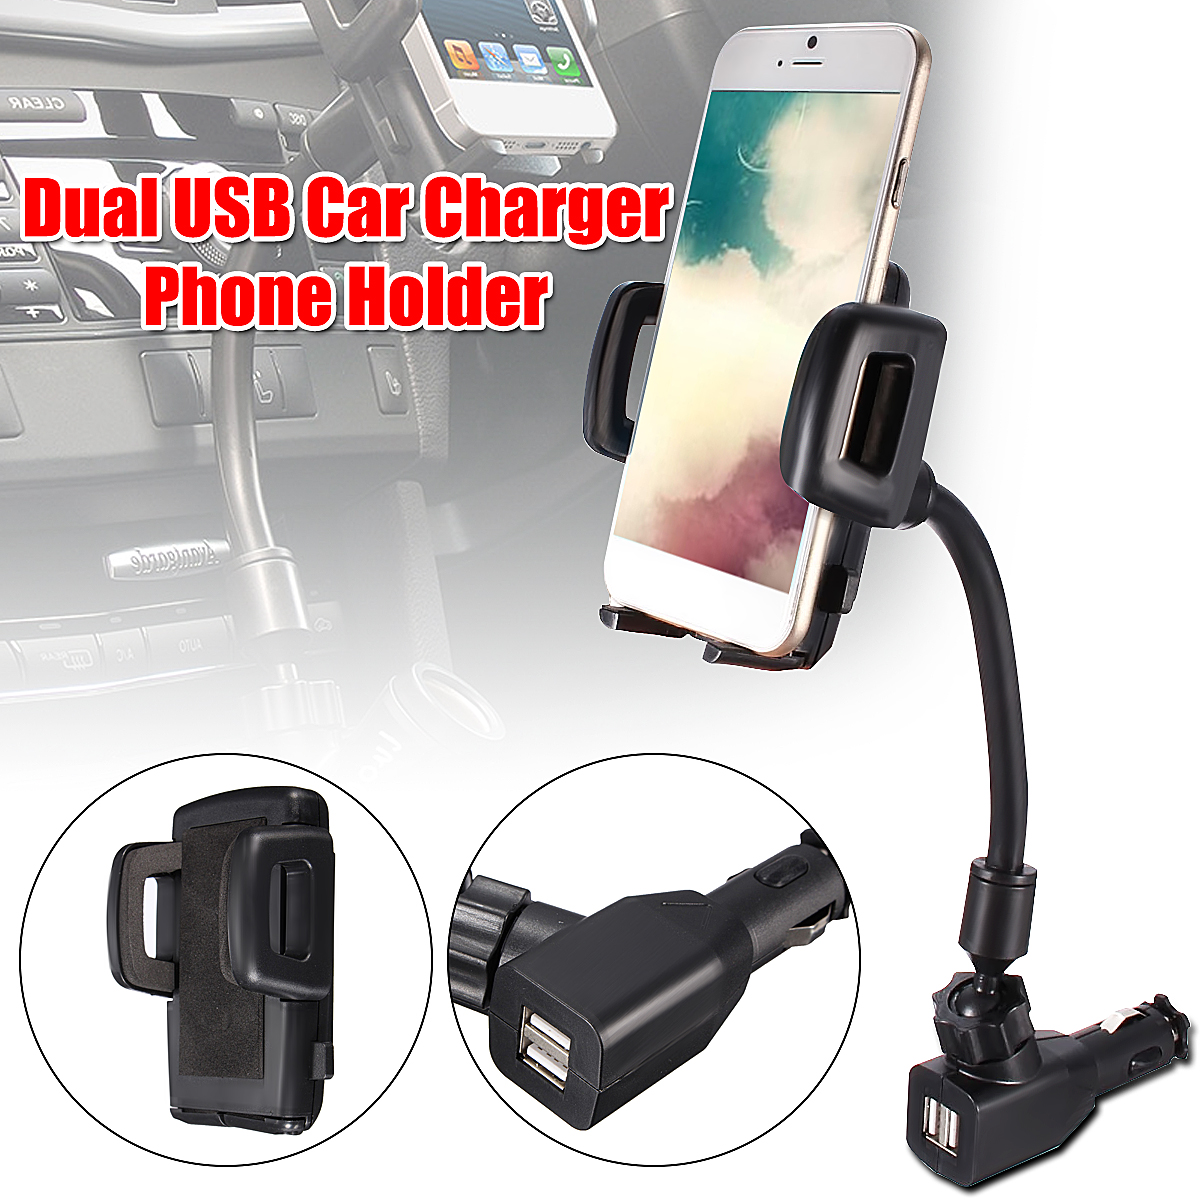 Everpert Universal Car Phone Stand Holder 2-Port USB Charger for iPhone 5 6 Samsung 